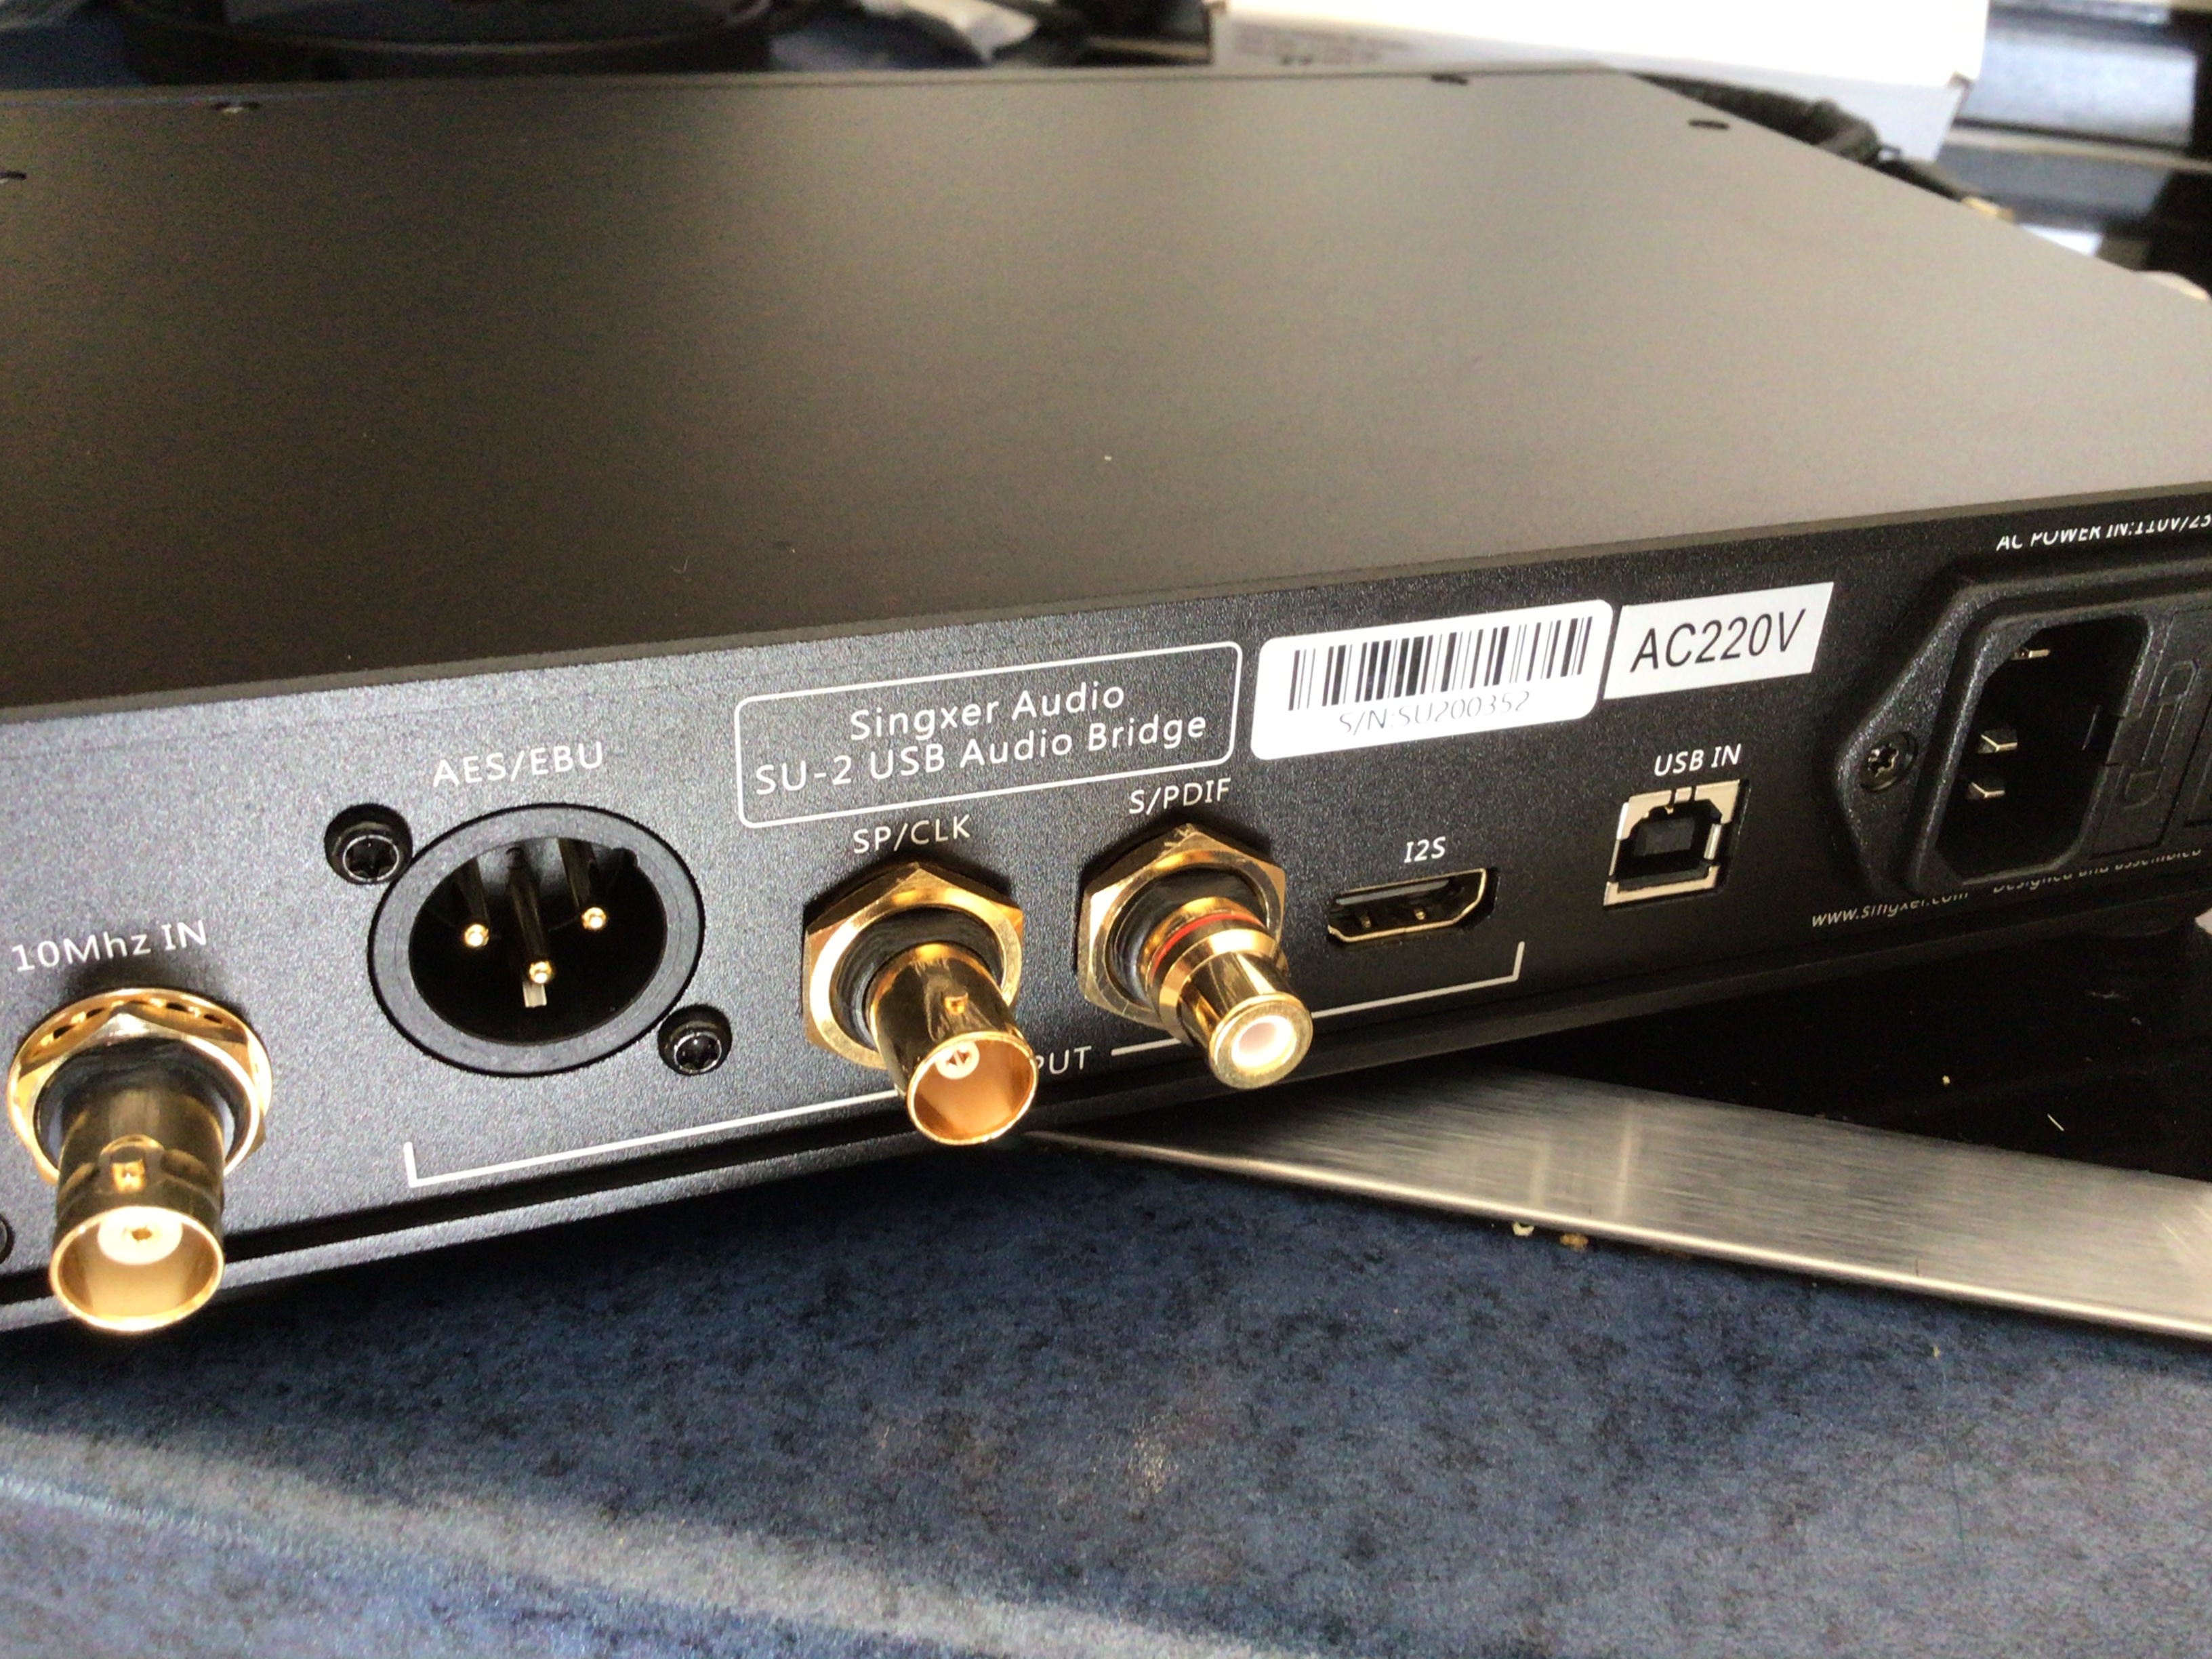 Singxer SU-2 DDC - Source Gear / Other - HifiGuides Forums